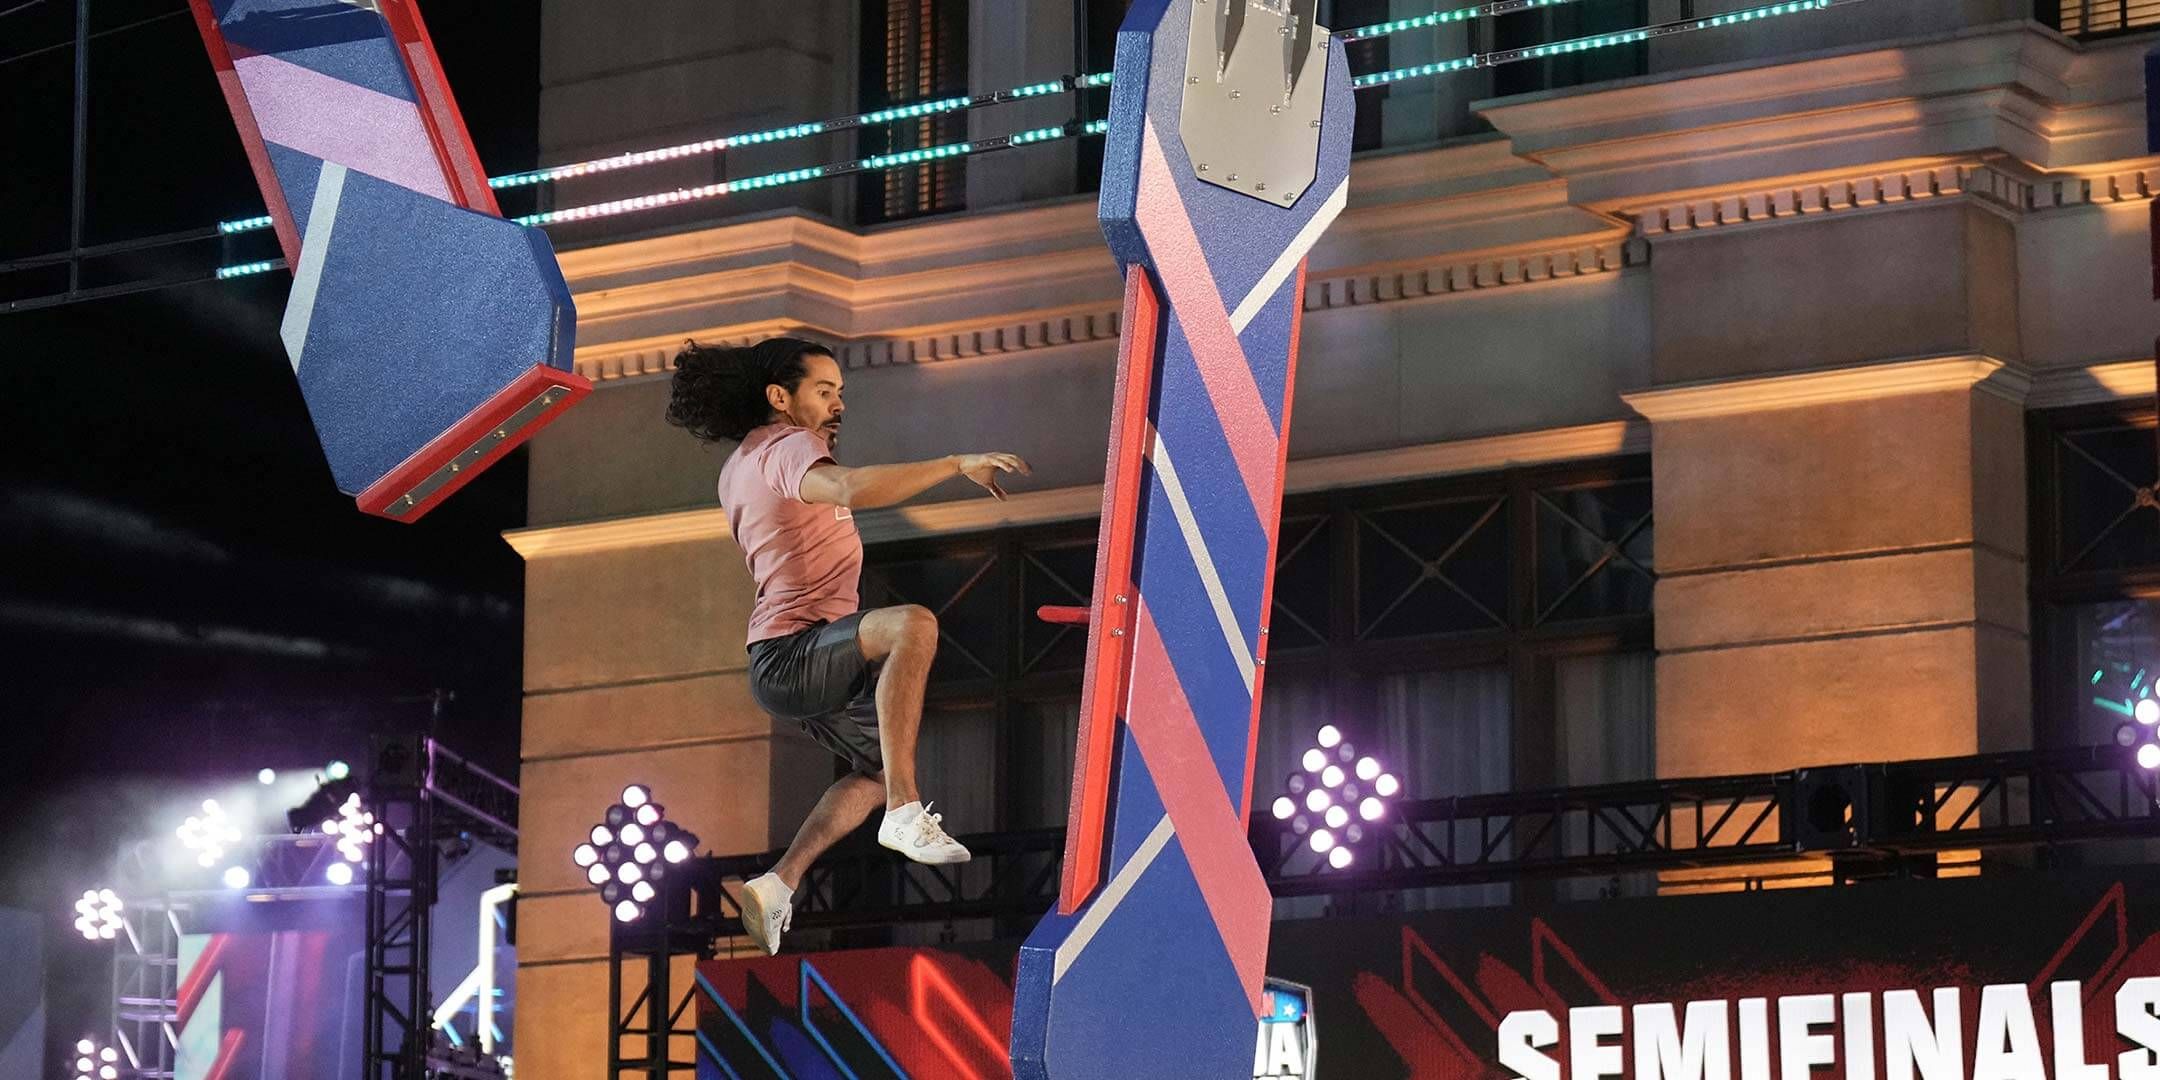 ANW Semifinals Promo Shot: Jay Flores ’12 completes “Lunatic Ledges” during the American Ninja Warrior semifinals in Los Angeles. Credit: Getty Images